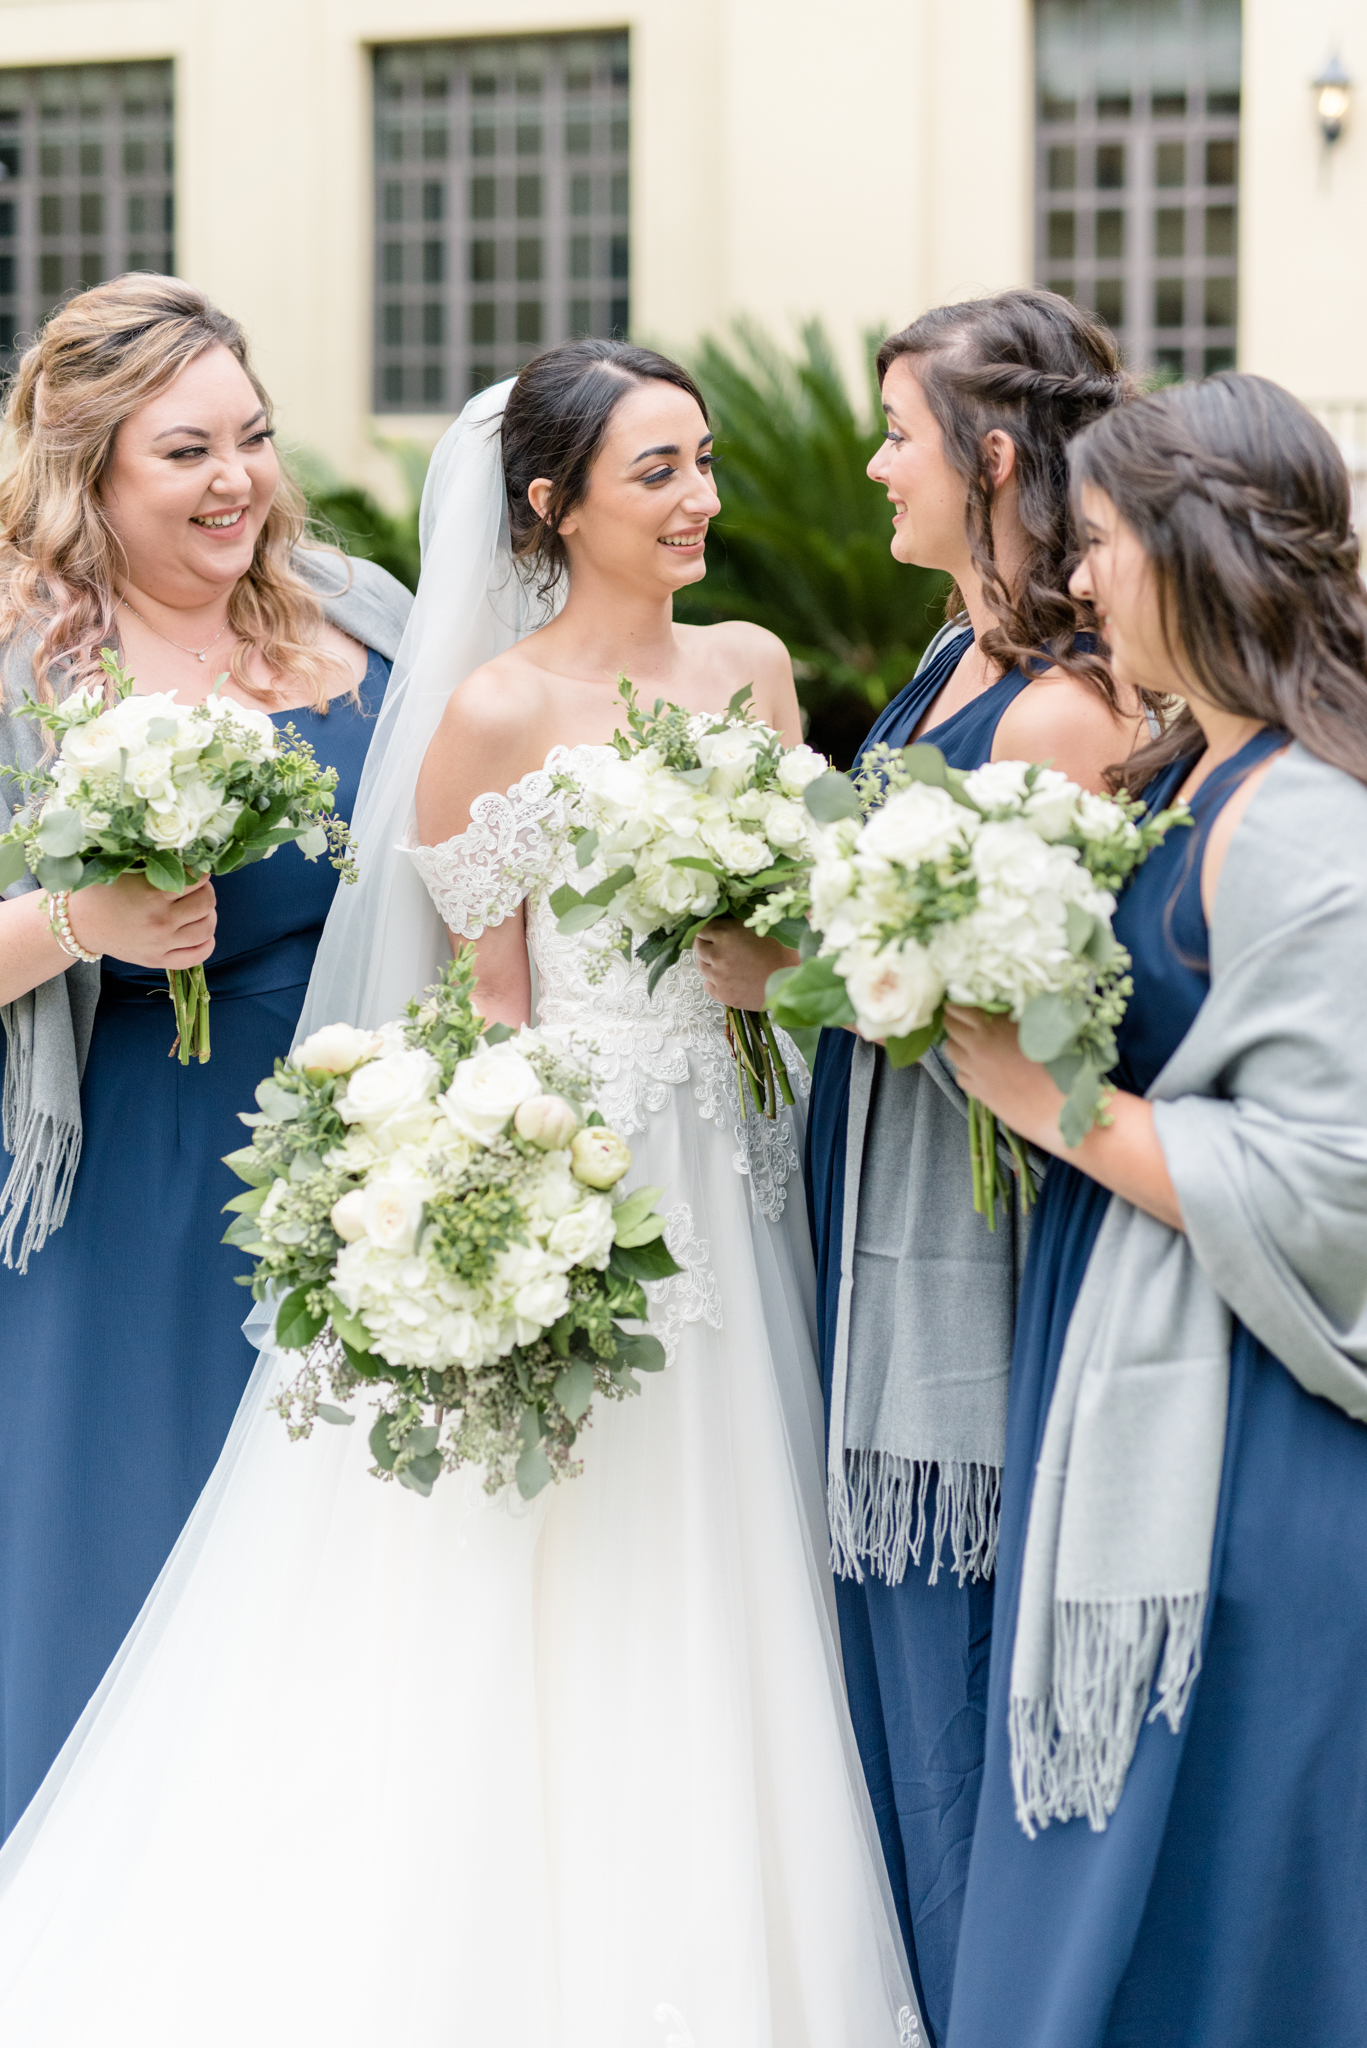 Bride and bridesmaids laugh together.